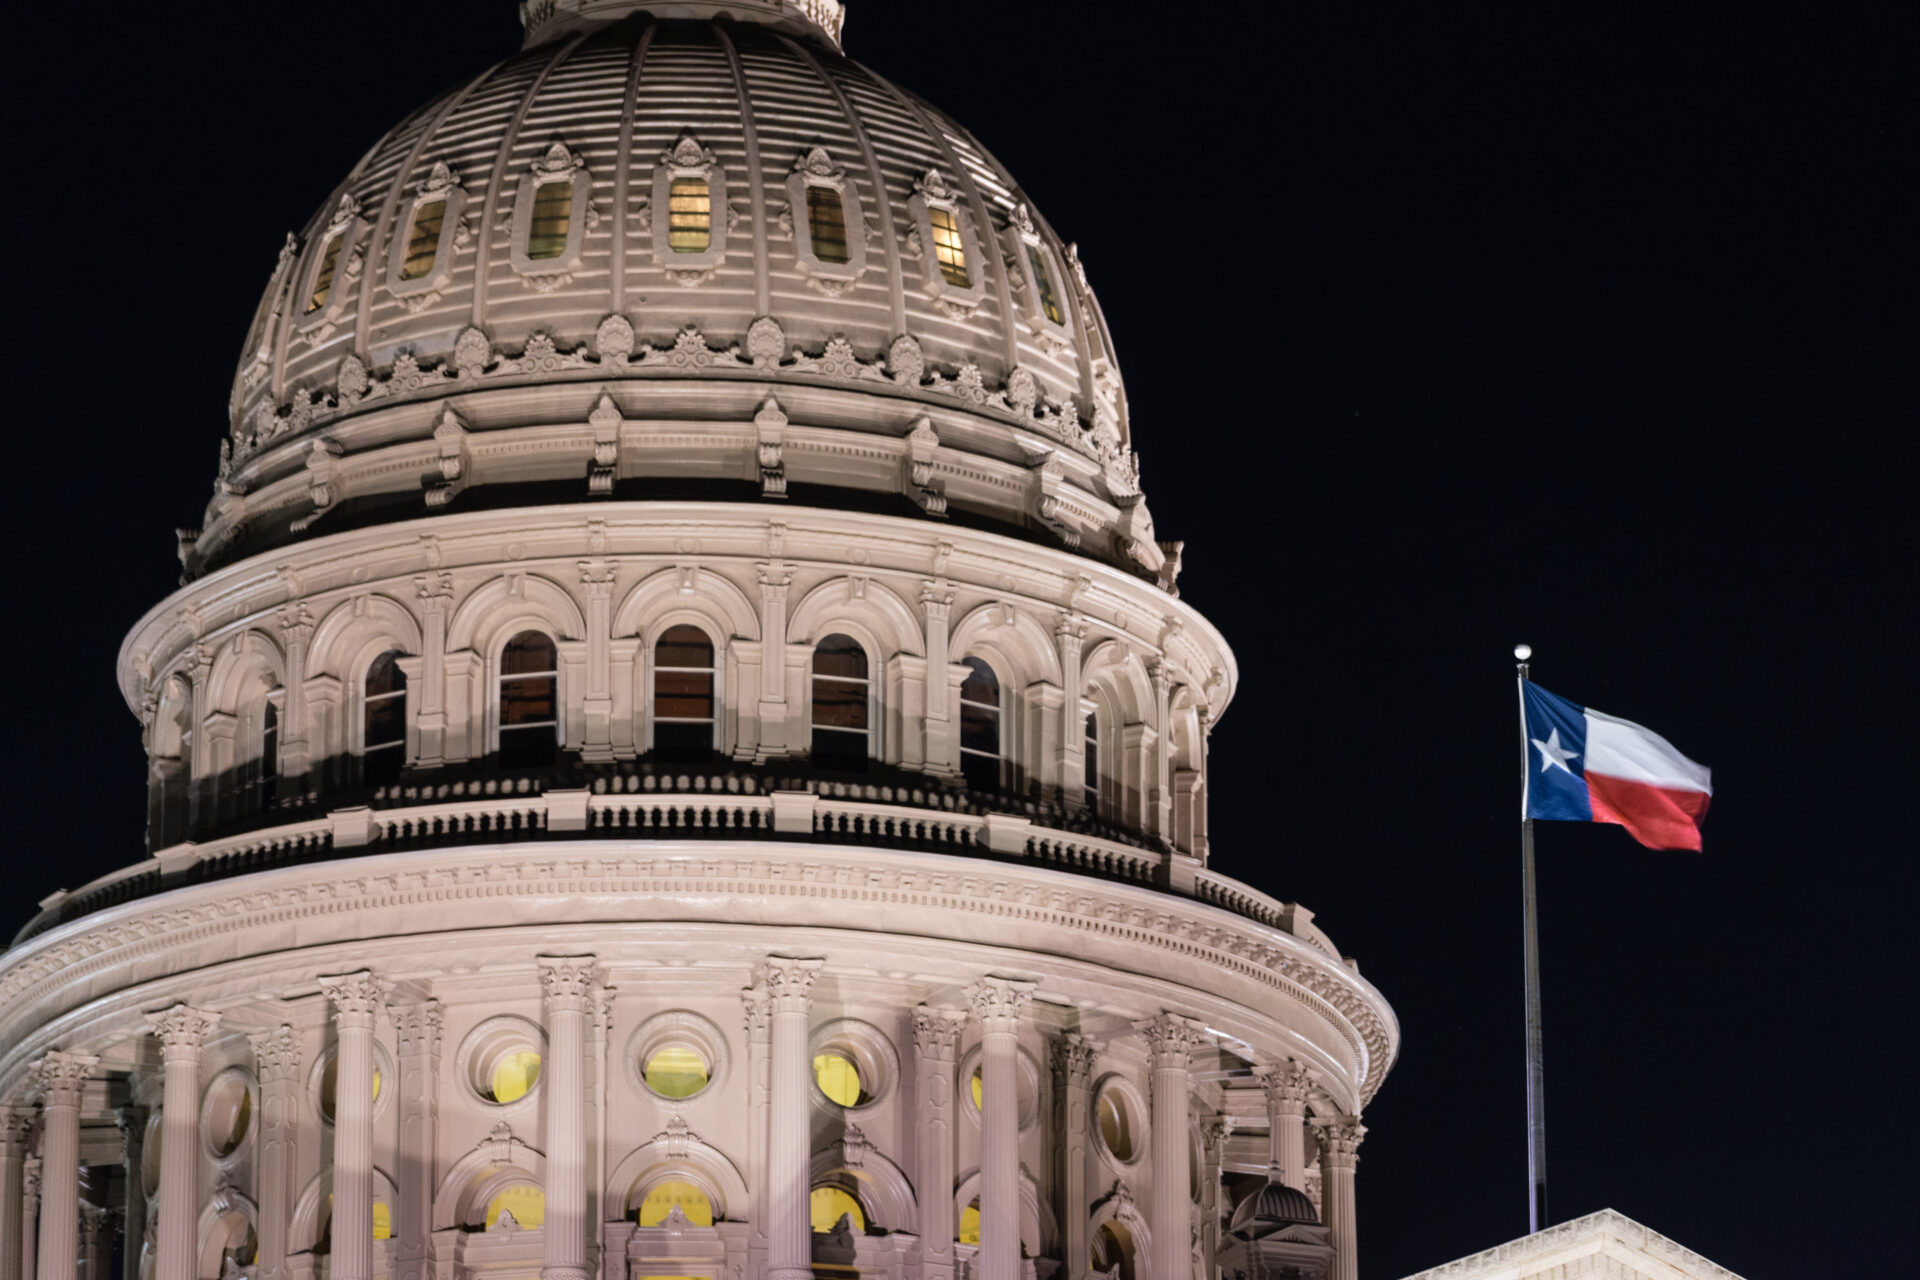 A striking photo of the dome of the Texas State Capitol building at night, lit brightly from below. Standing independently of the dome is a flag pole with the Texas state flag at the top, also lit from below, creating a stark contrast to the darkness of the night sky.